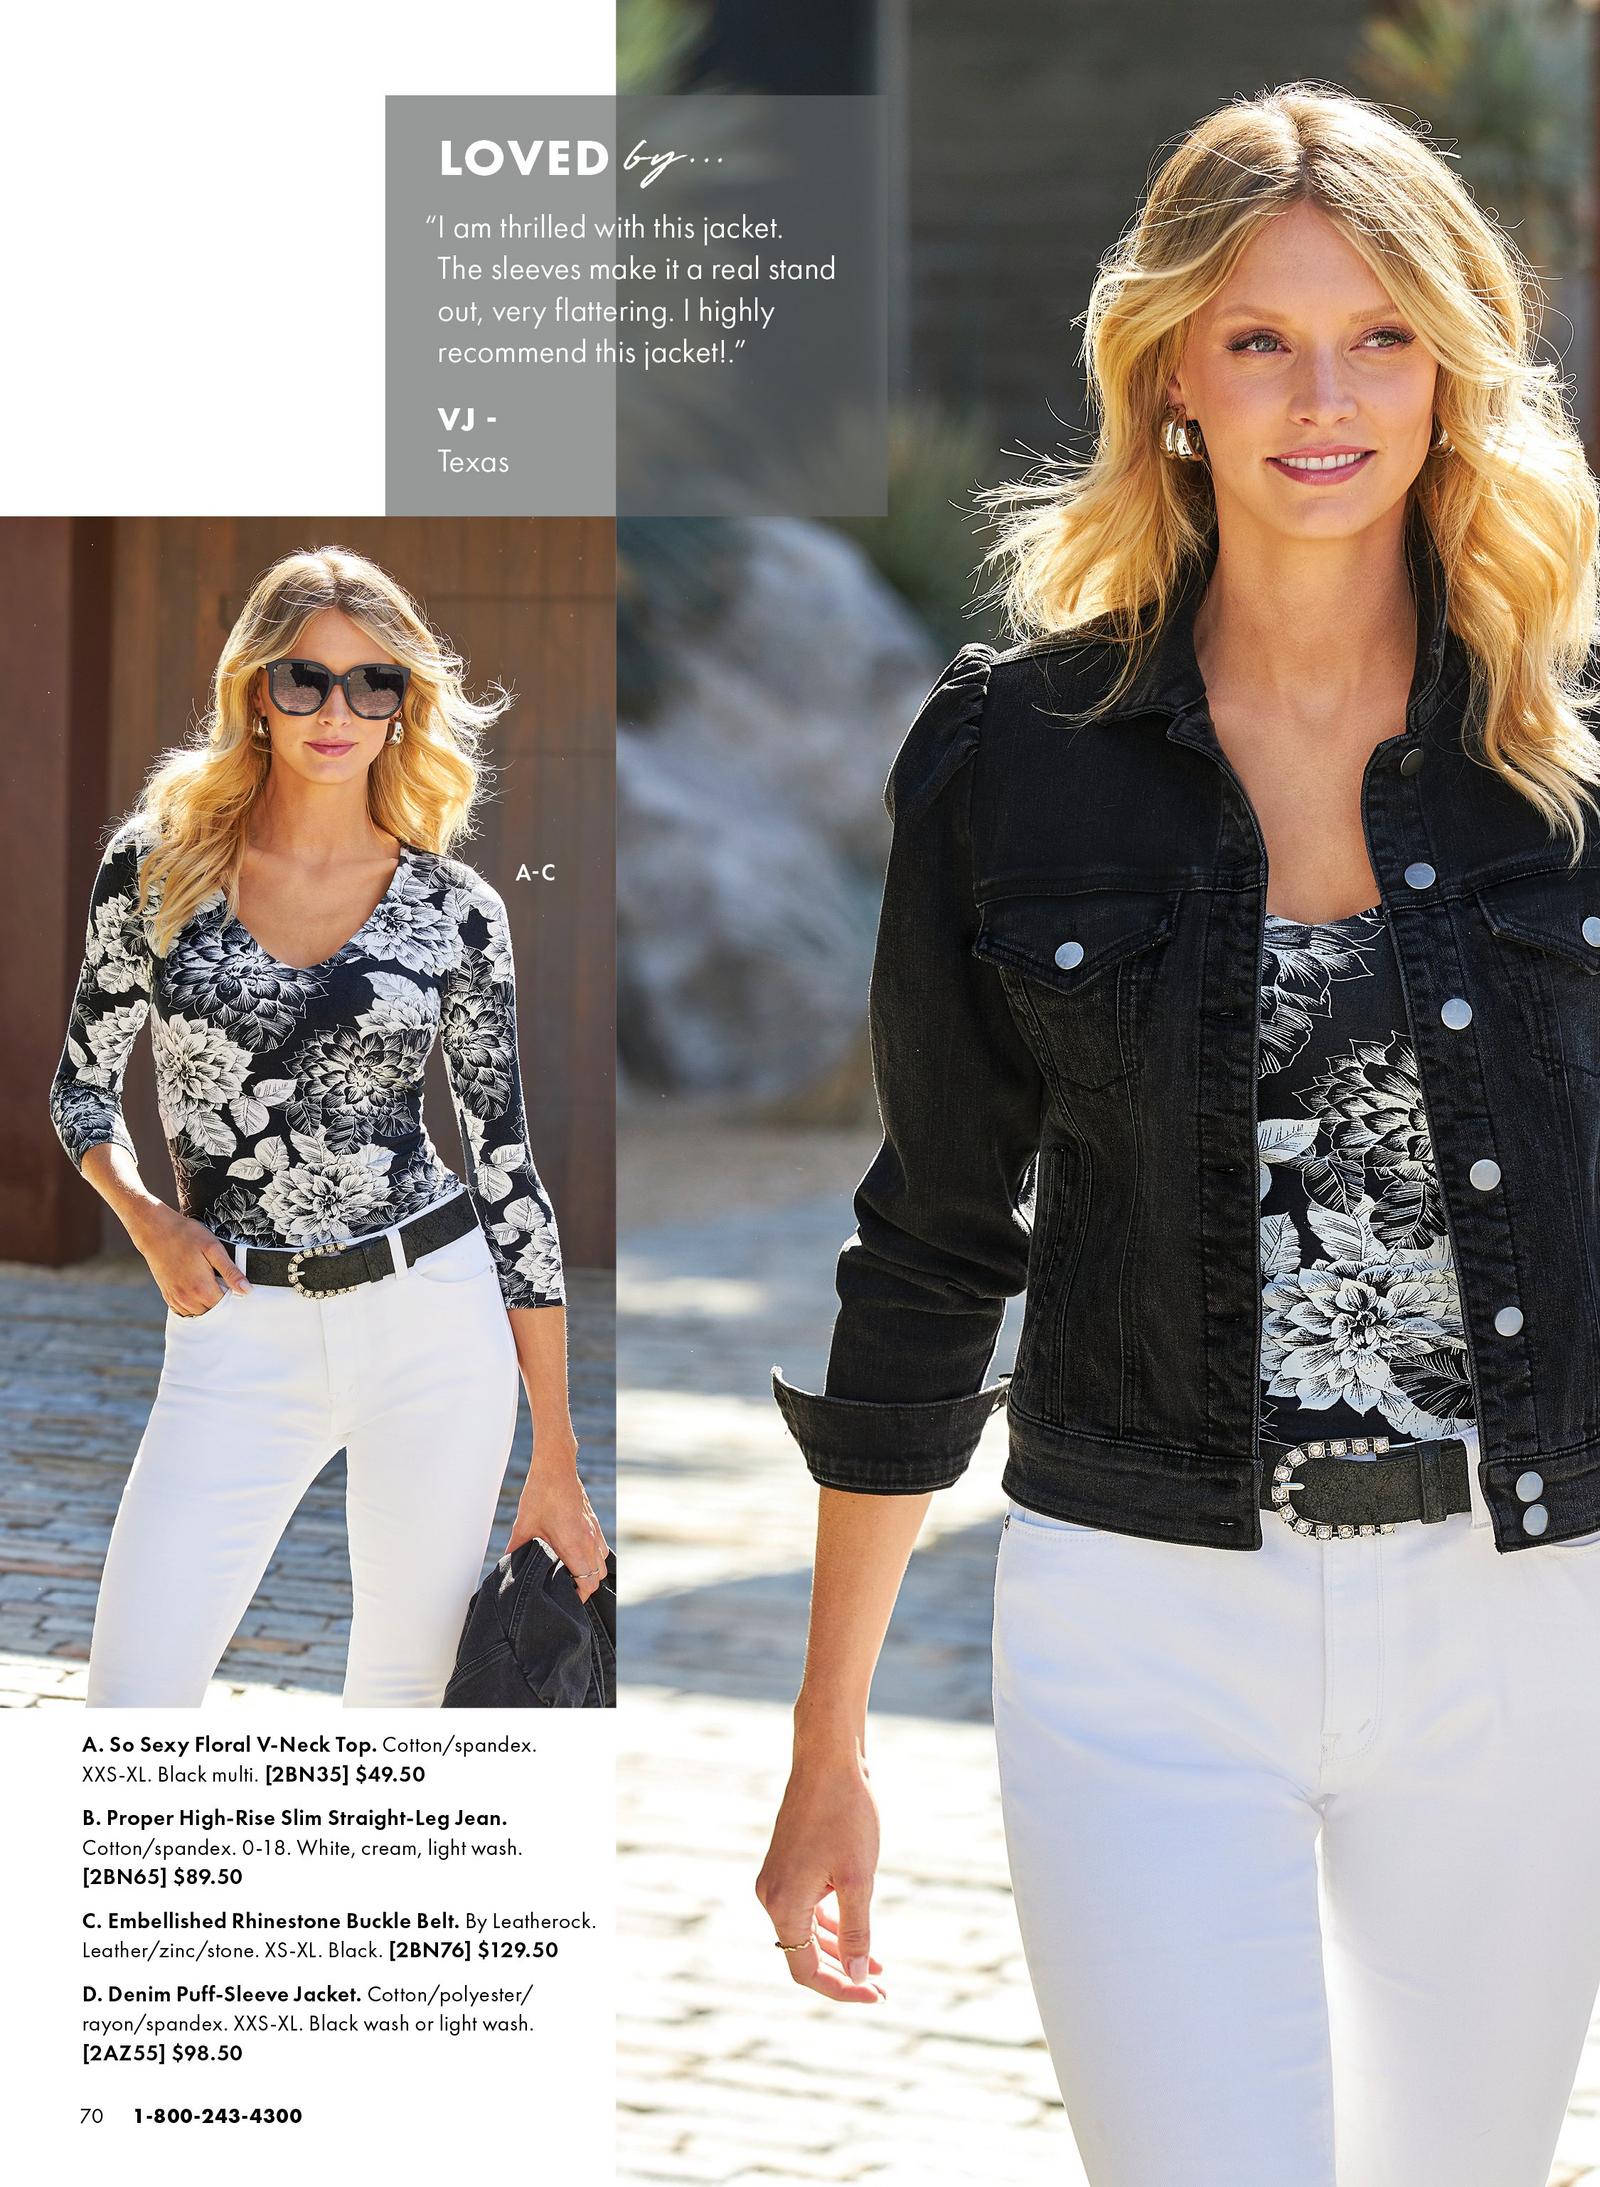 Model on the left is wearing the so sexy floral v-neck top, the proper high rise slim straight leg jean and the embellished rhinestone buckle belt. Model on the right is shown wearing the so sexy floral v-neck top, the proper high rise slim straight leg jean, the embellished rhinestone buckle belt and the denim puff sleeve jacket.